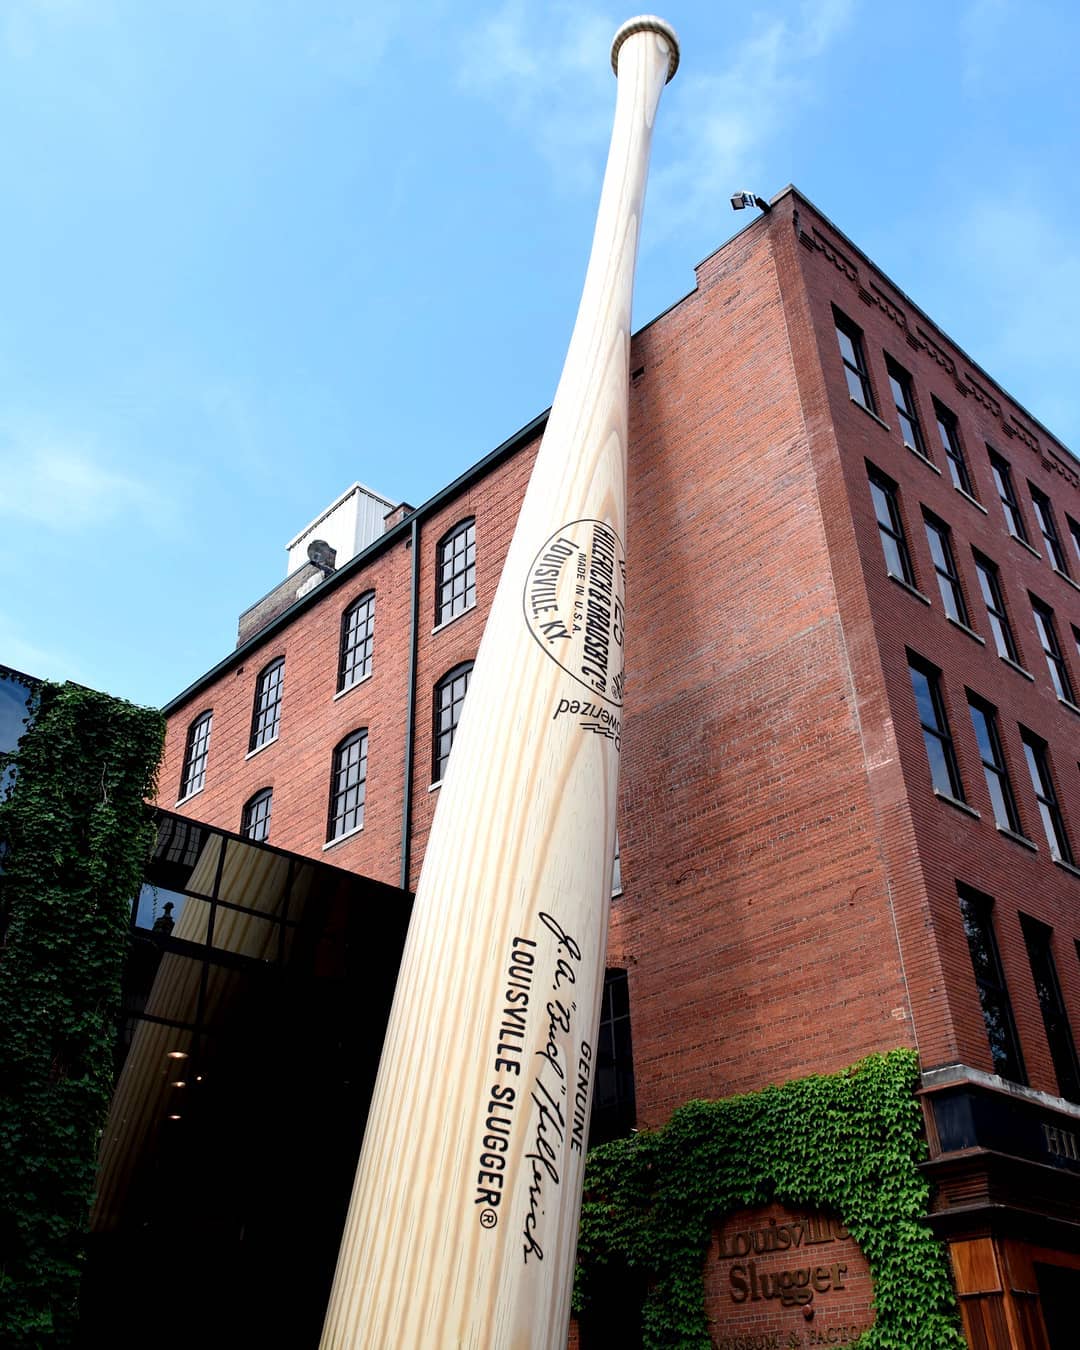 Looking up at a giant bat statue that leans against big red brick Louisville Slugger Museum & Factory. Photo by Instagram user @styleblueprint